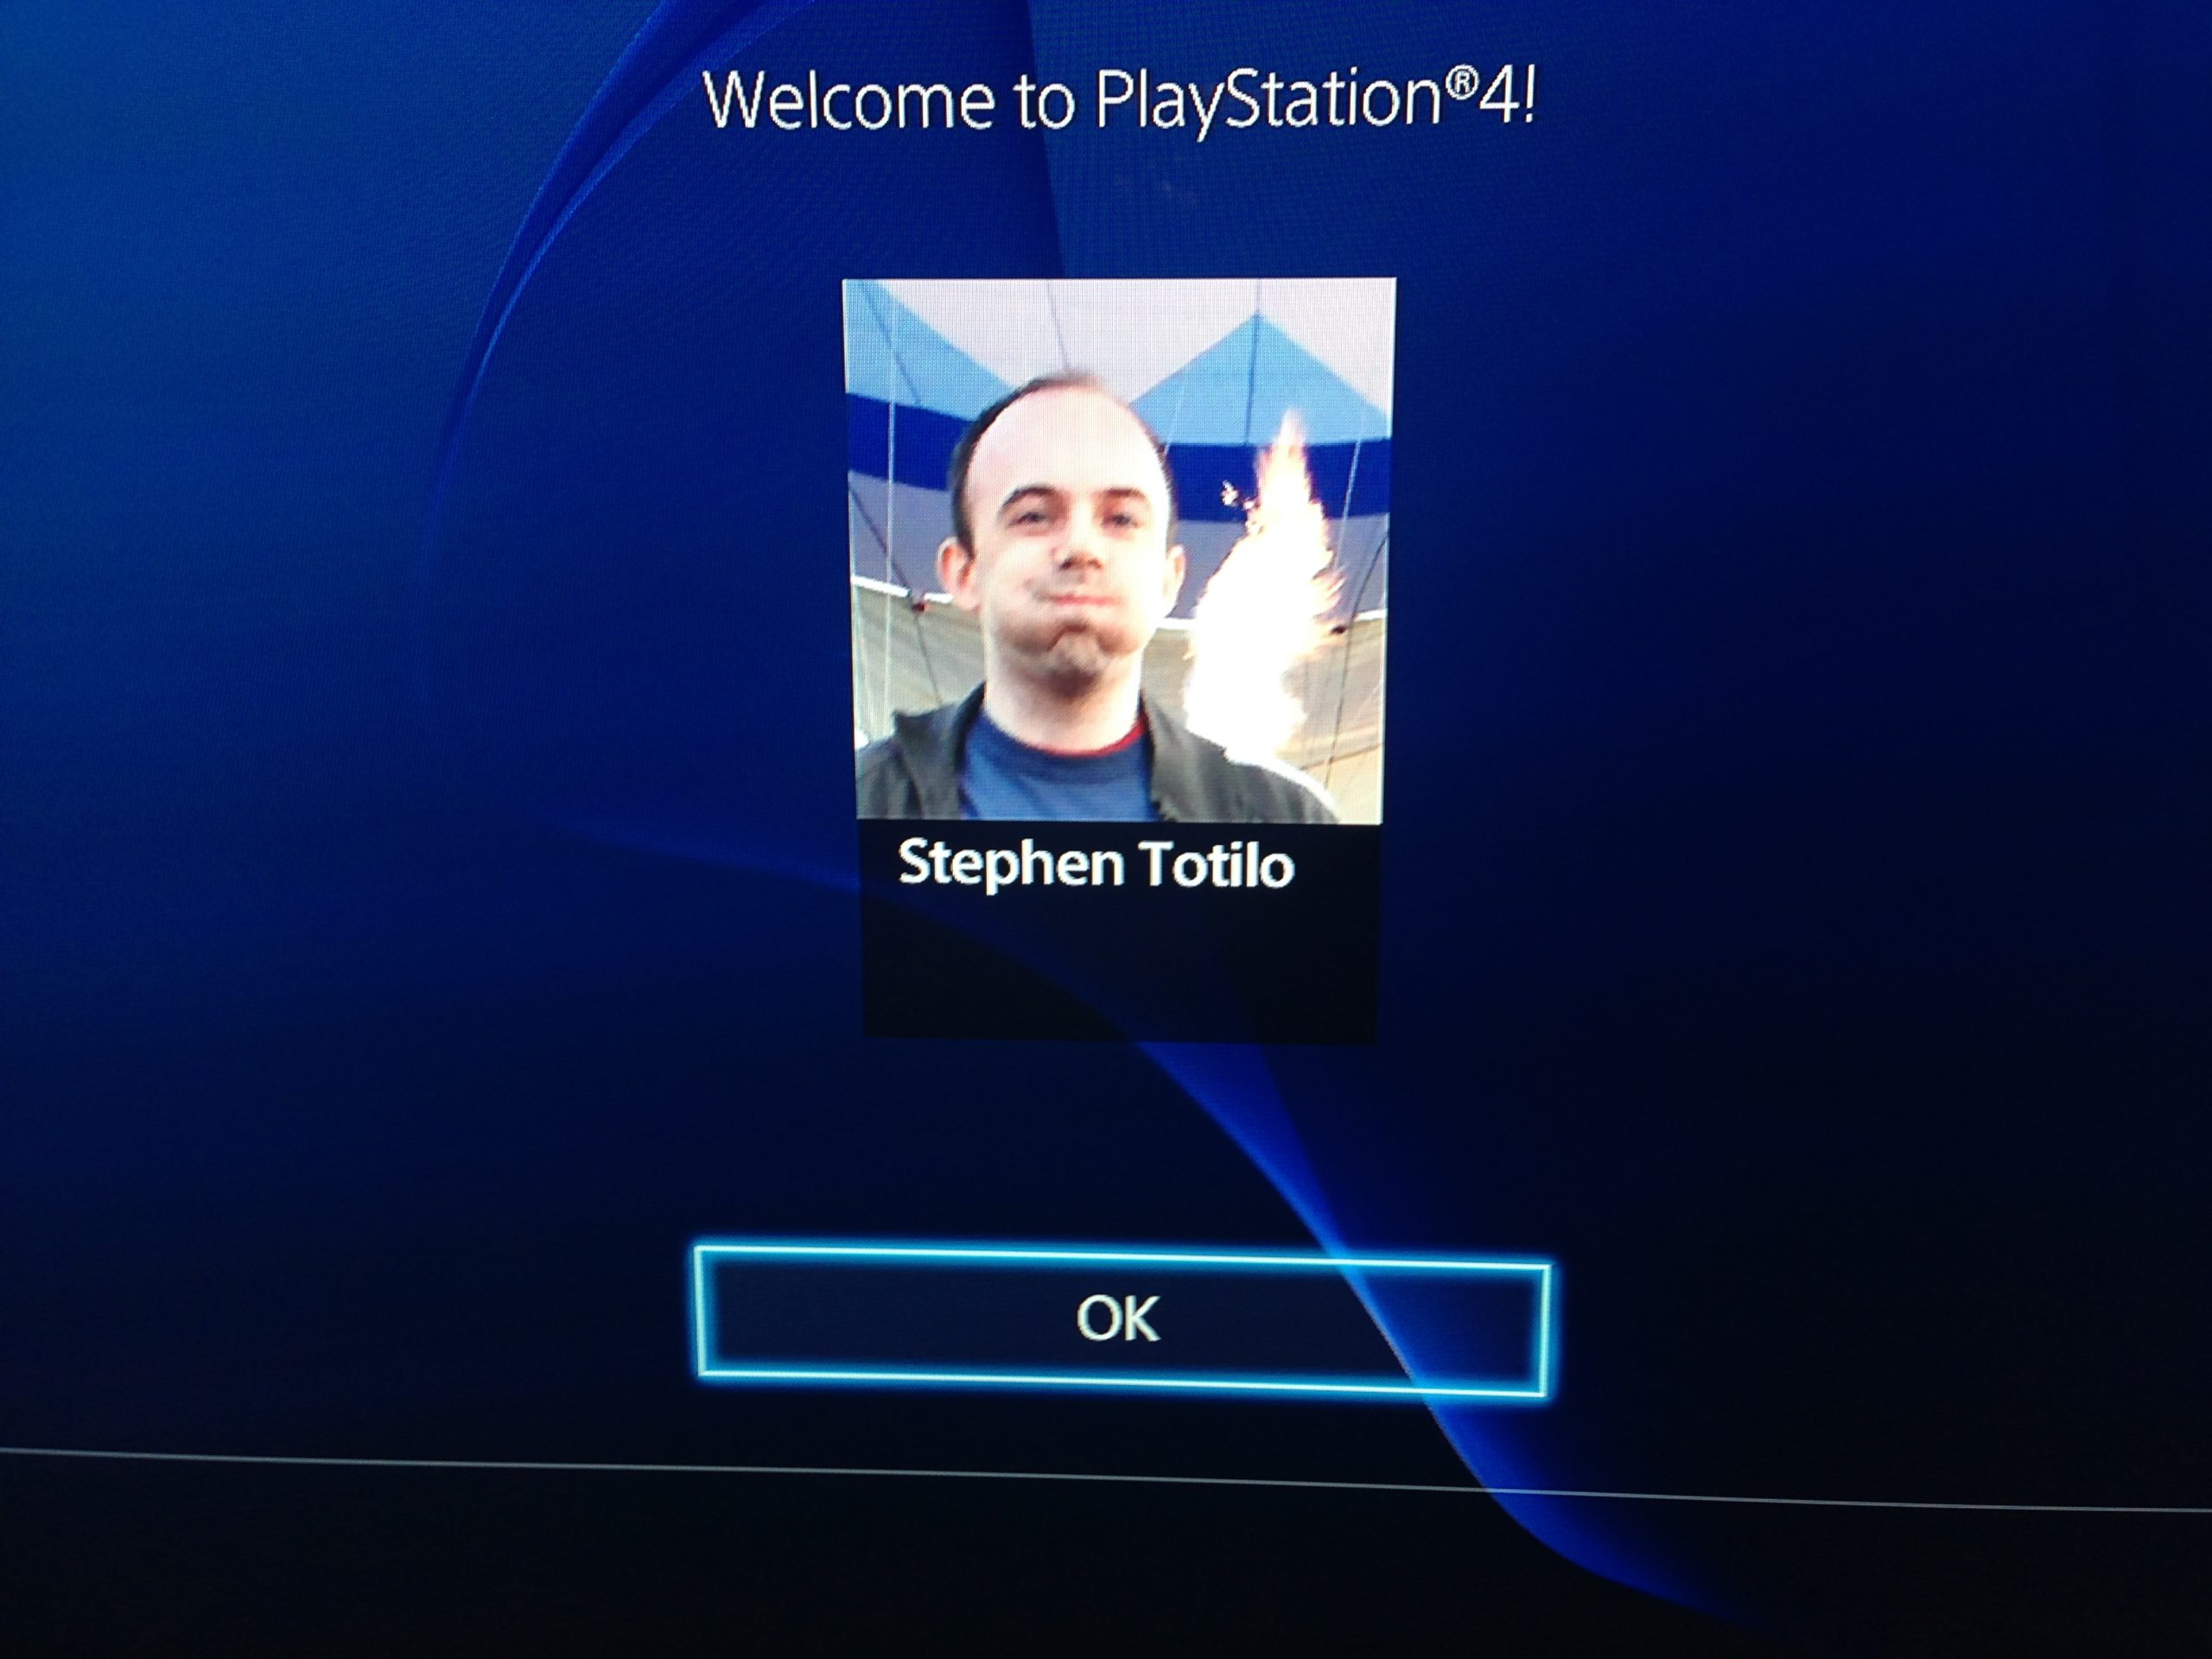 Study The PS4’s Social Network Settings Before Putting It Online